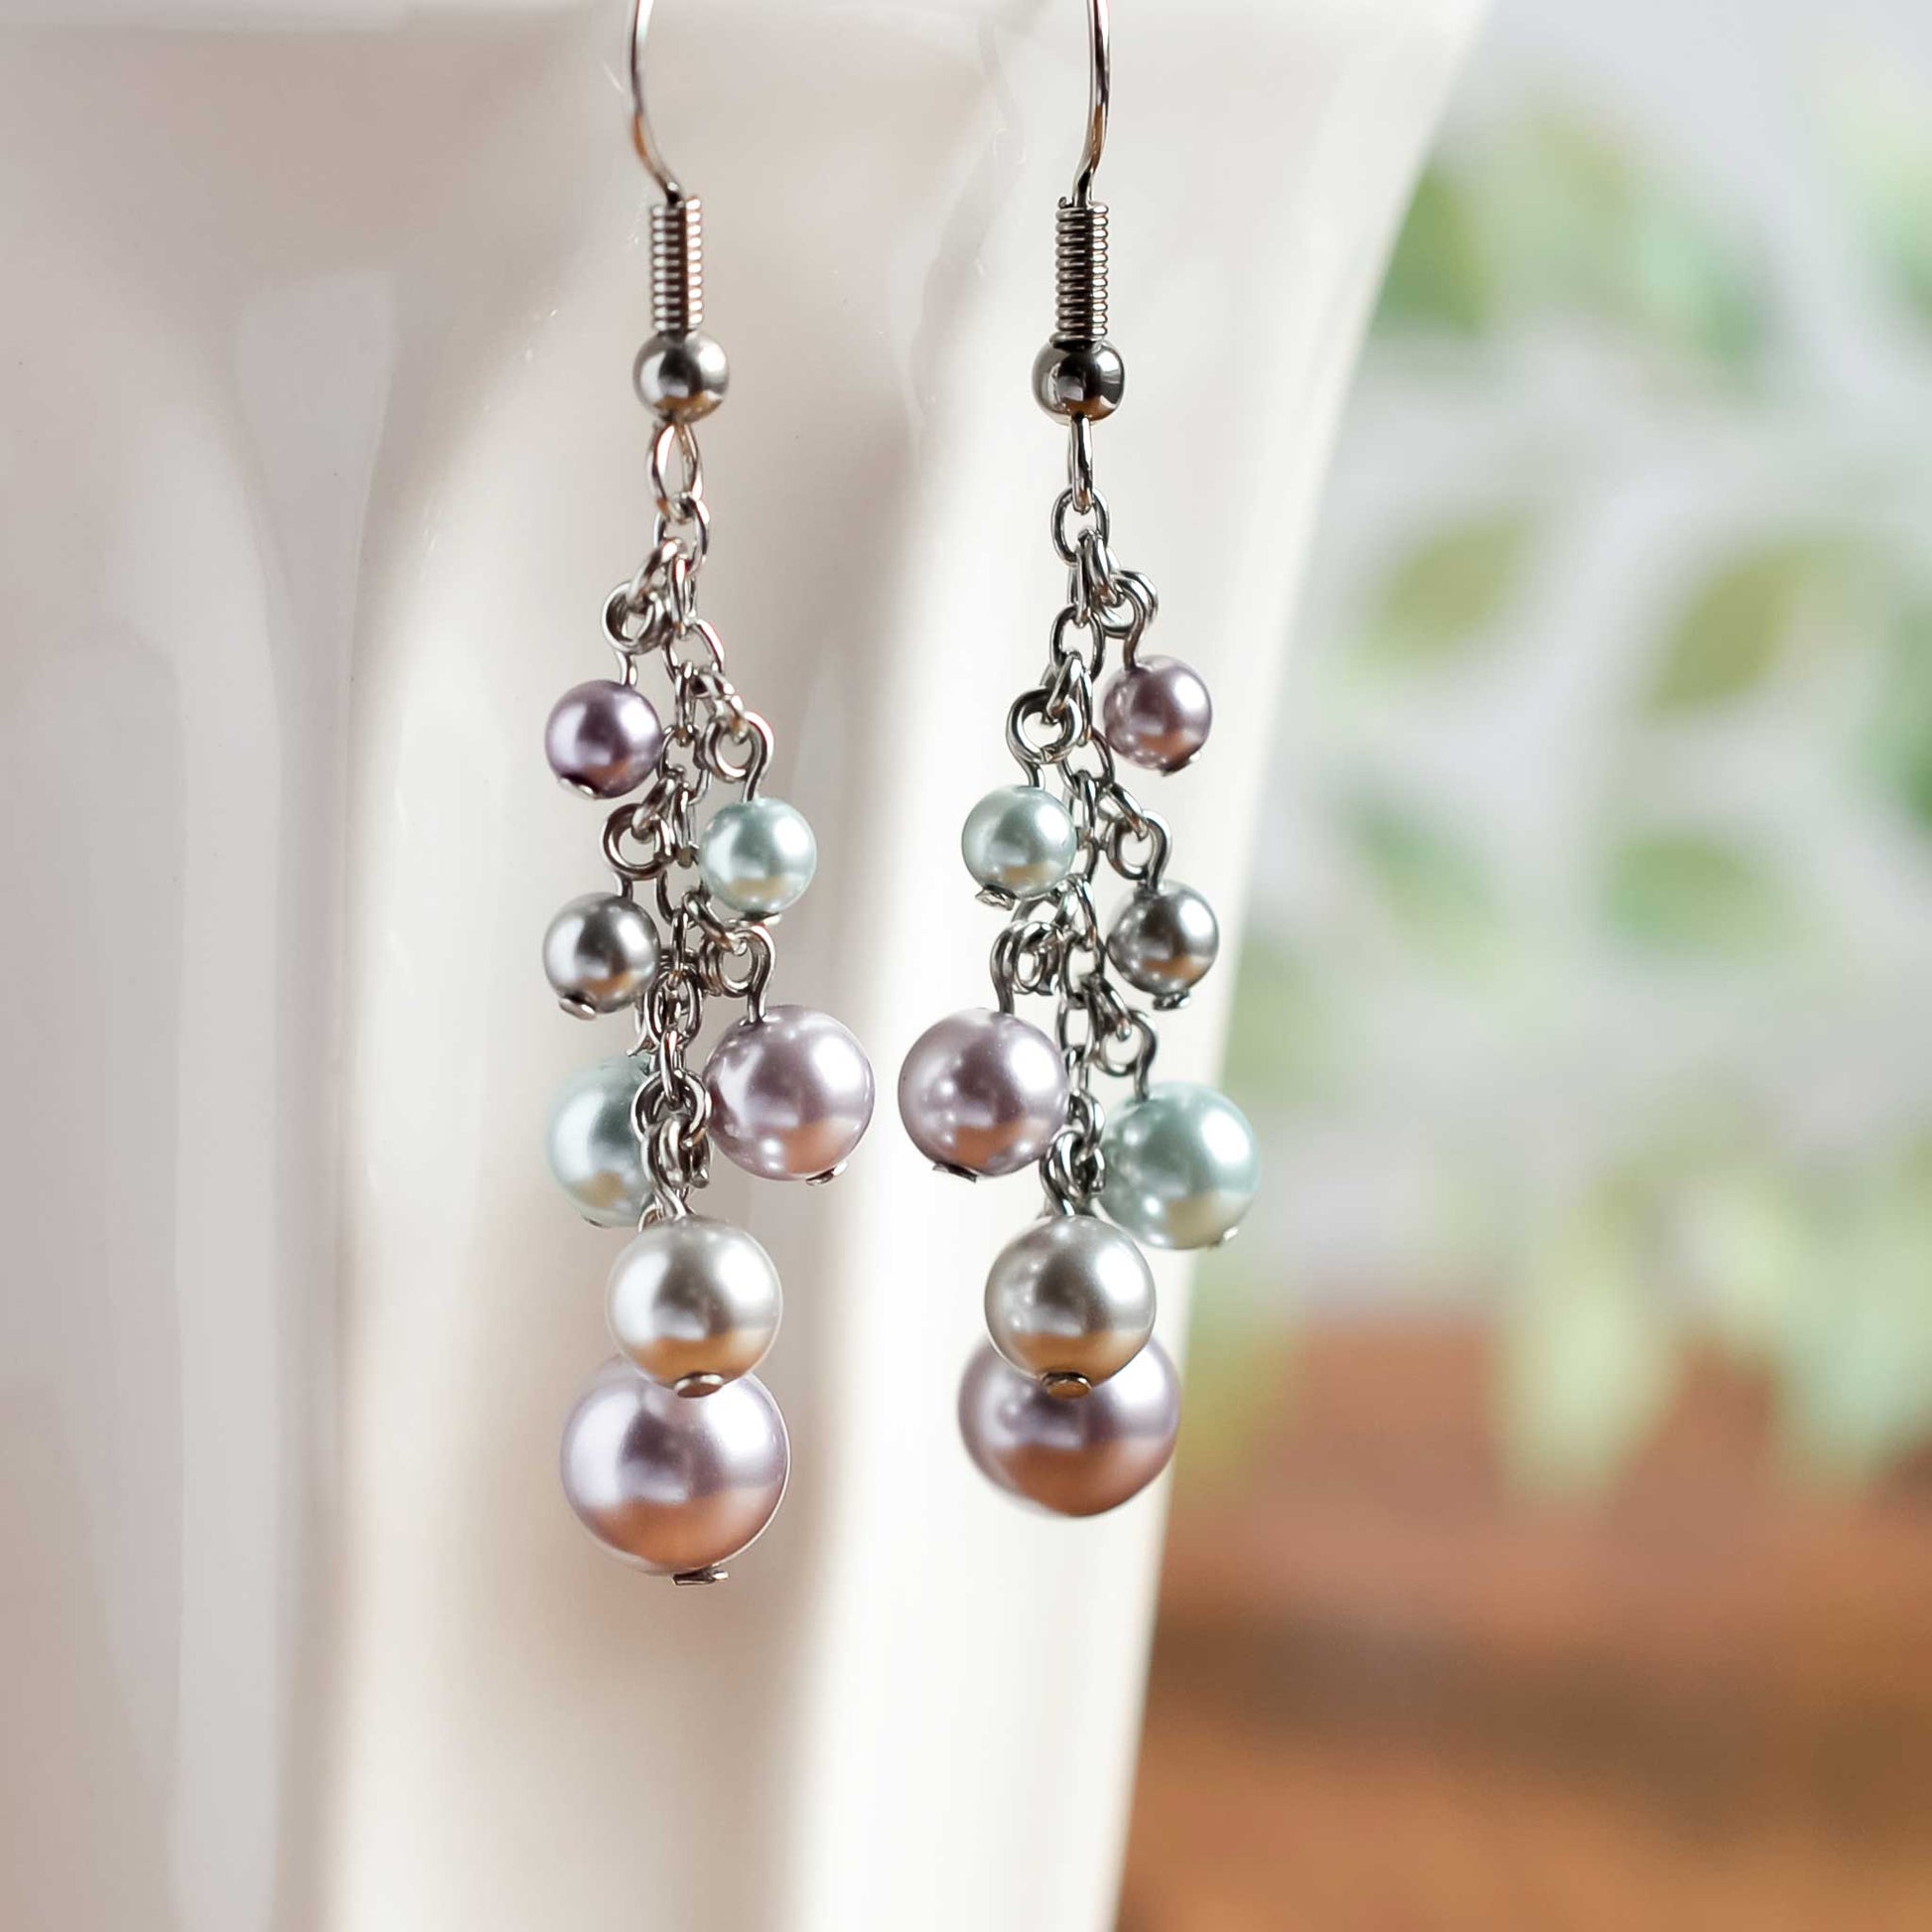 Faux pearl cluster drop earrings hanging from white cup